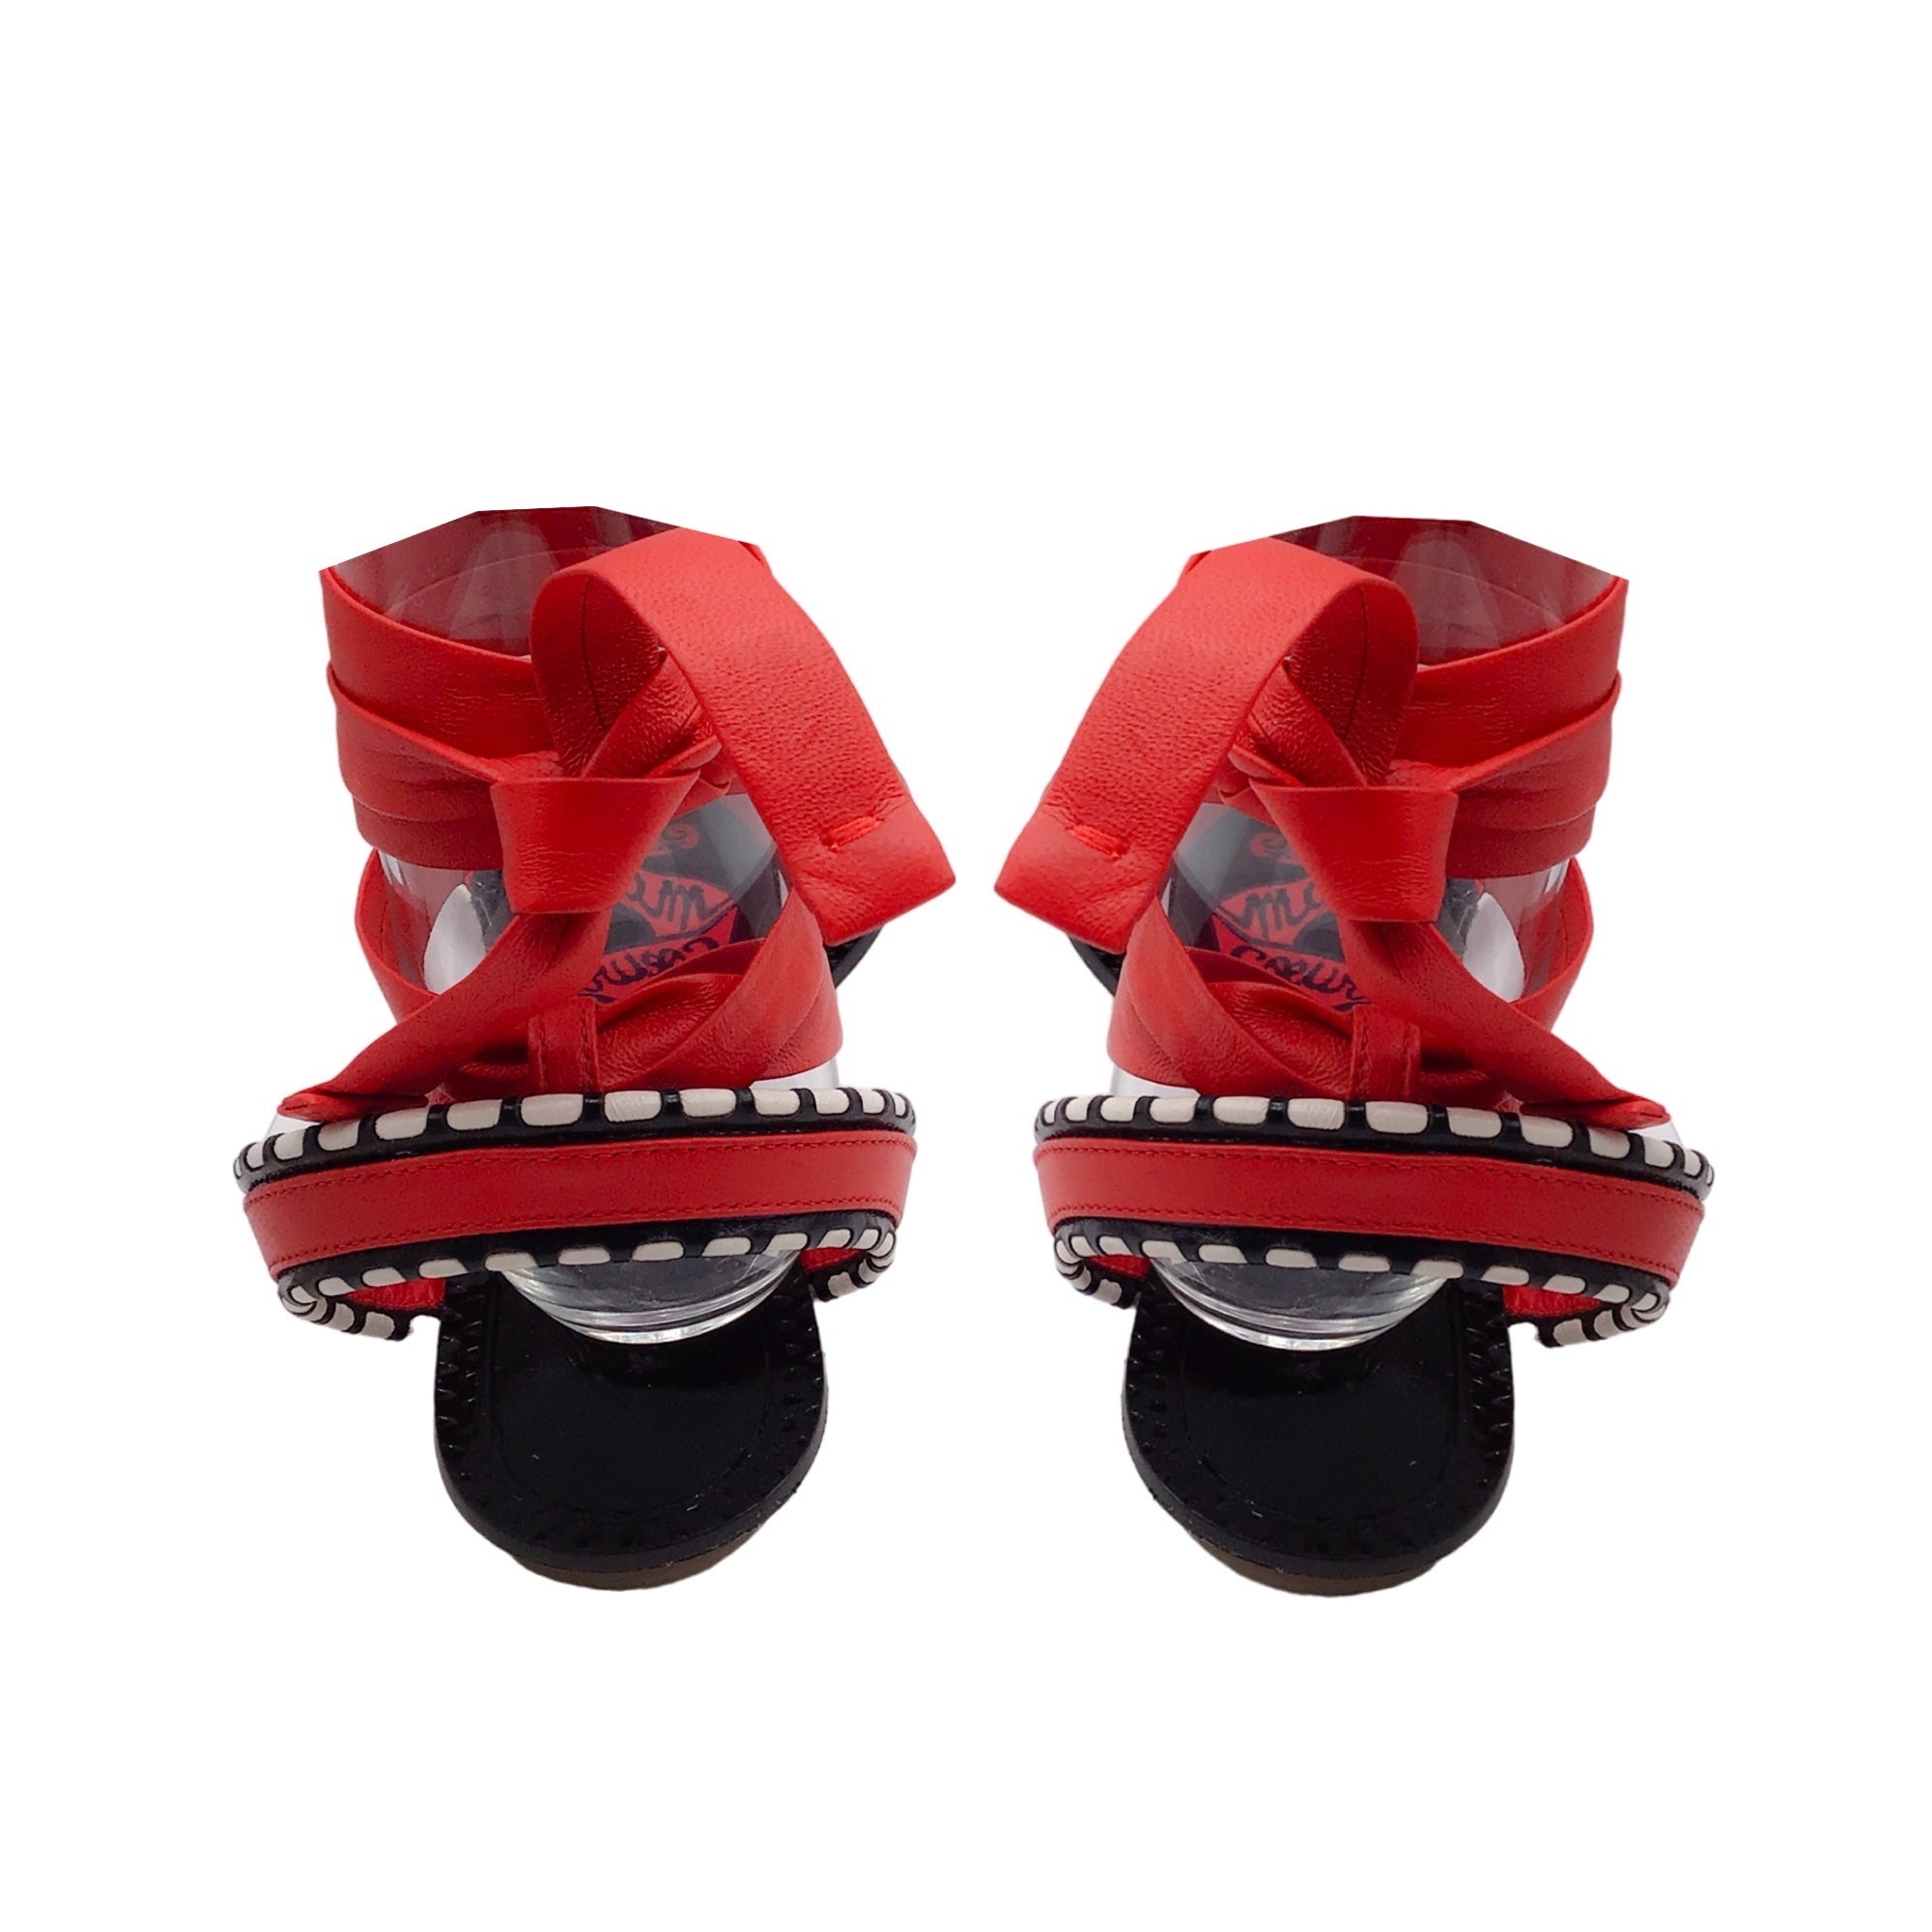 Alaia Red / Black Mon Coeur Leather Ankle Wrap Flat Sandals